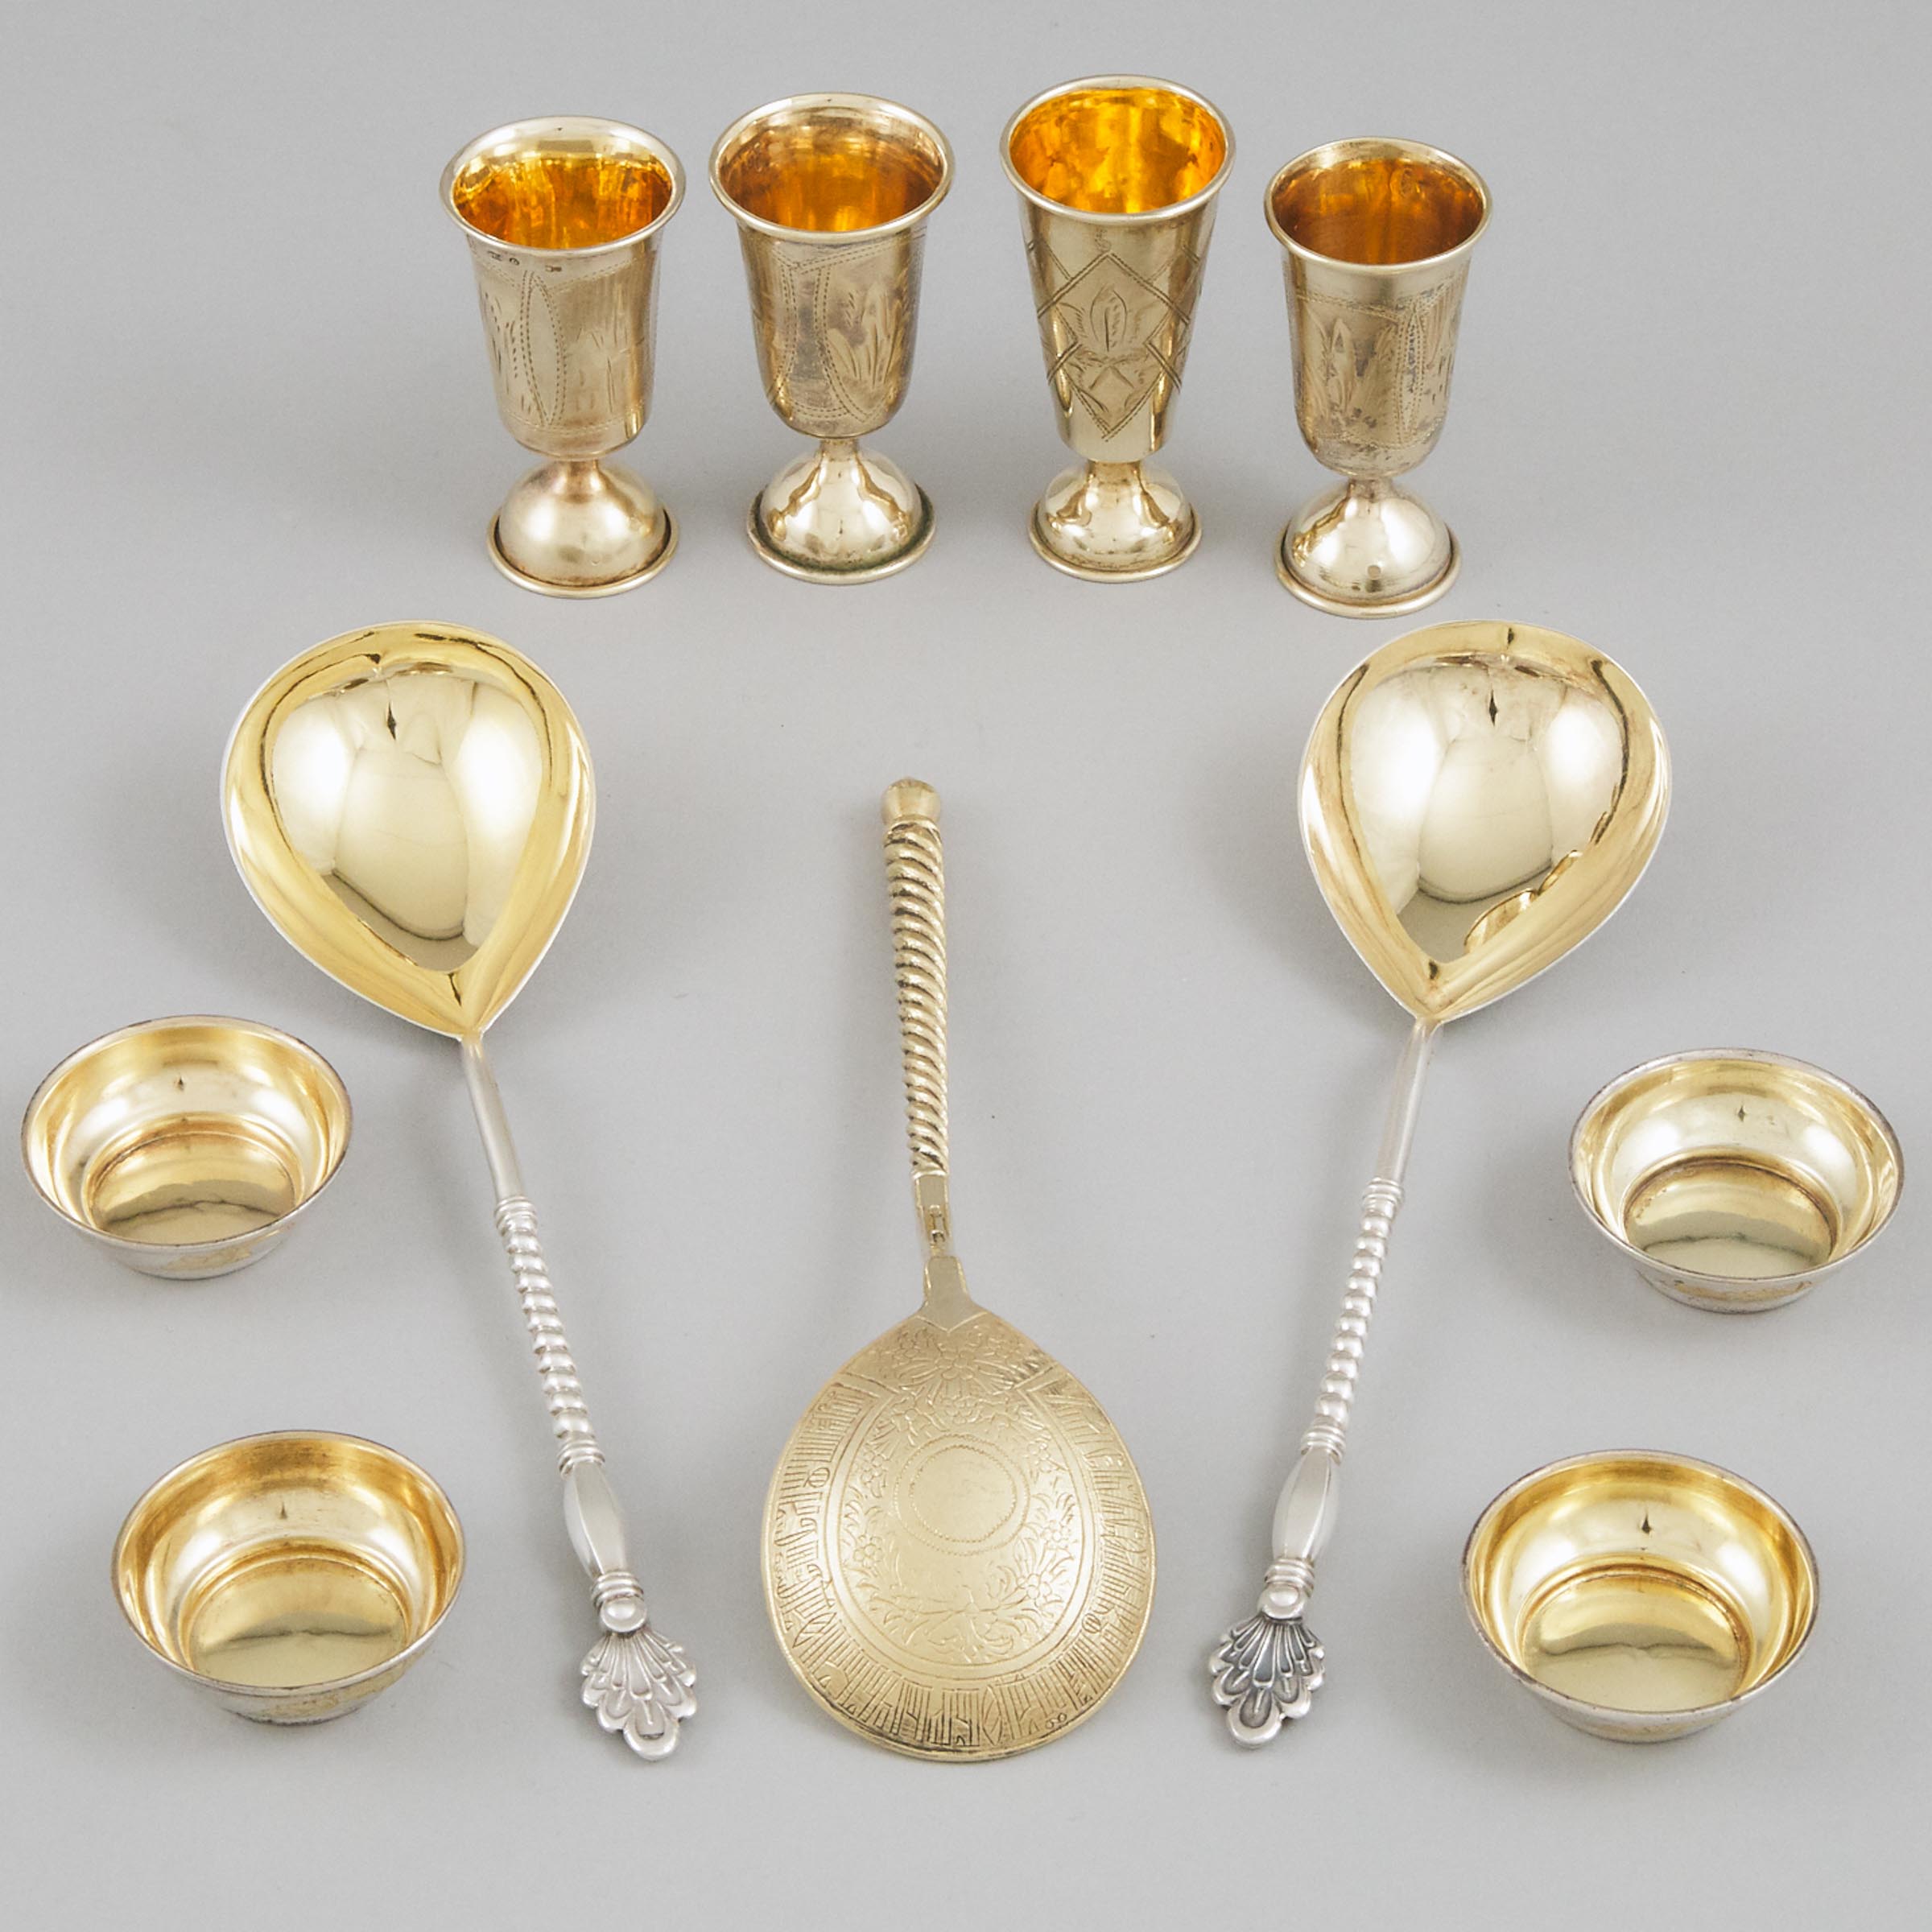 Four Russian Silver and Silver-Gilt Vodka Cups, Four Small Bowls and Three Spoons, late 19th/early 20th century